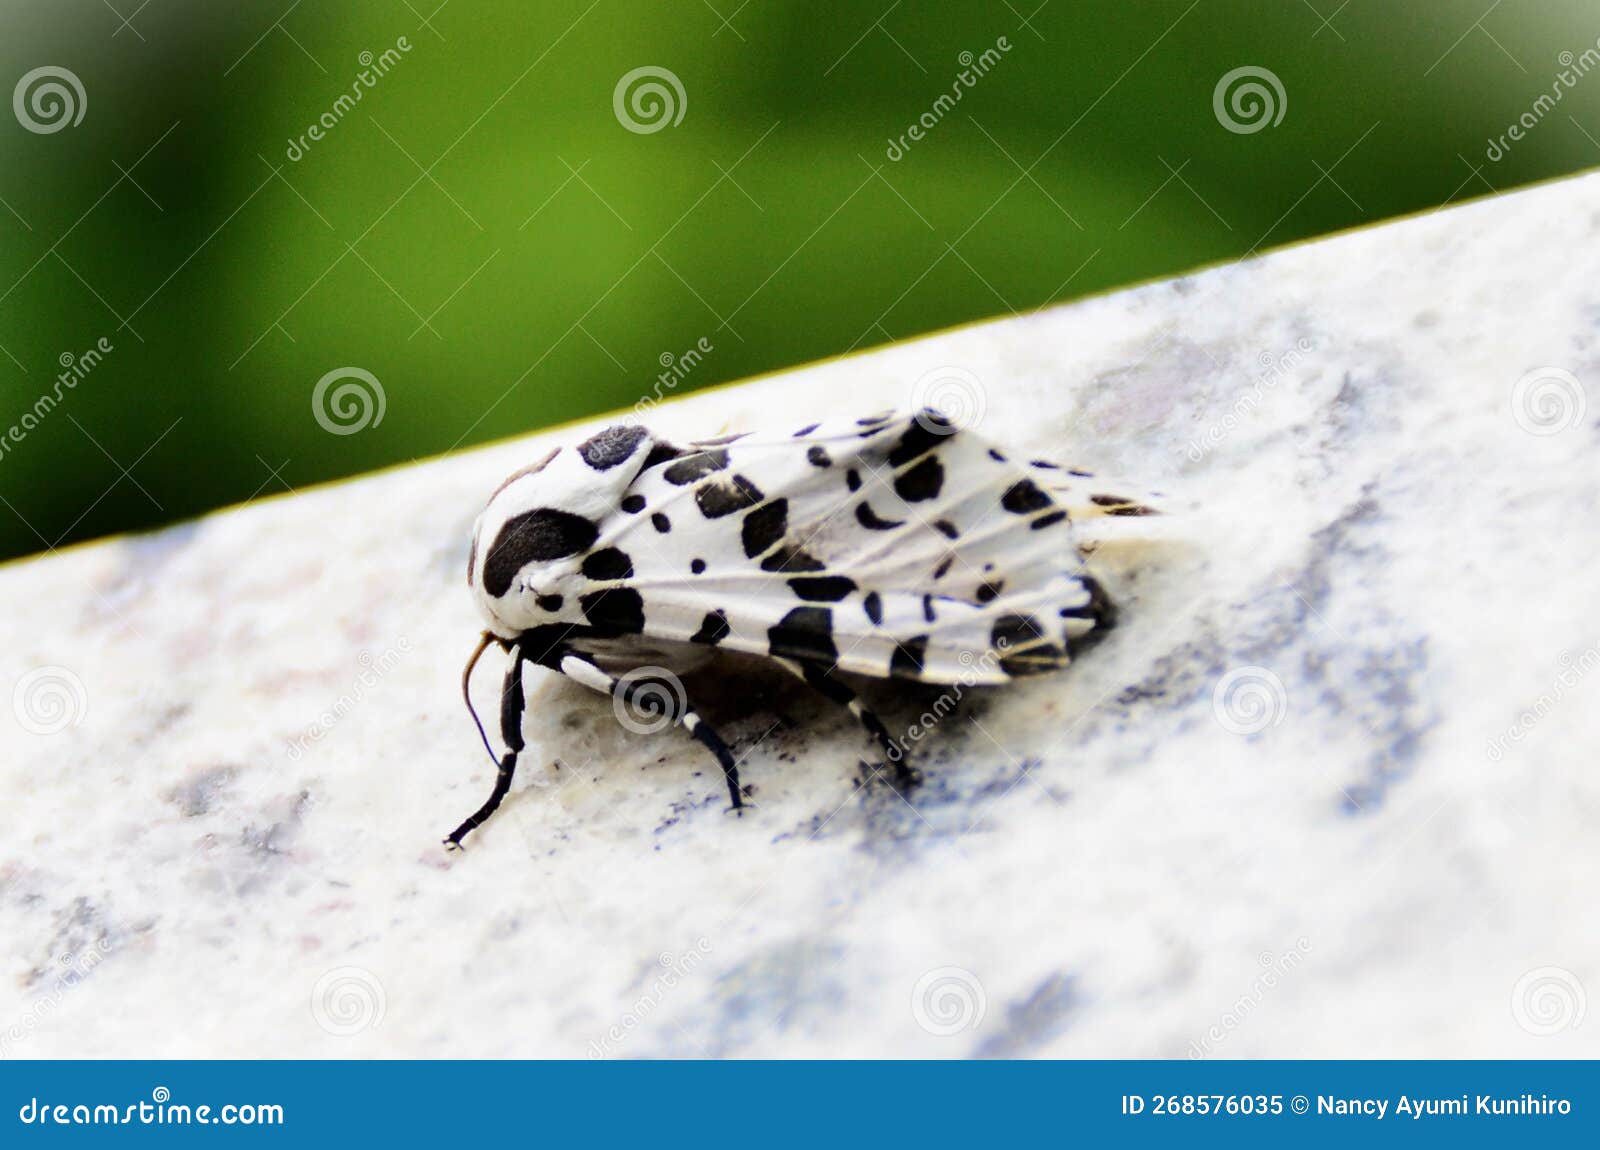 the beautiful hypercompe scribonia white moth with black perched on the stone